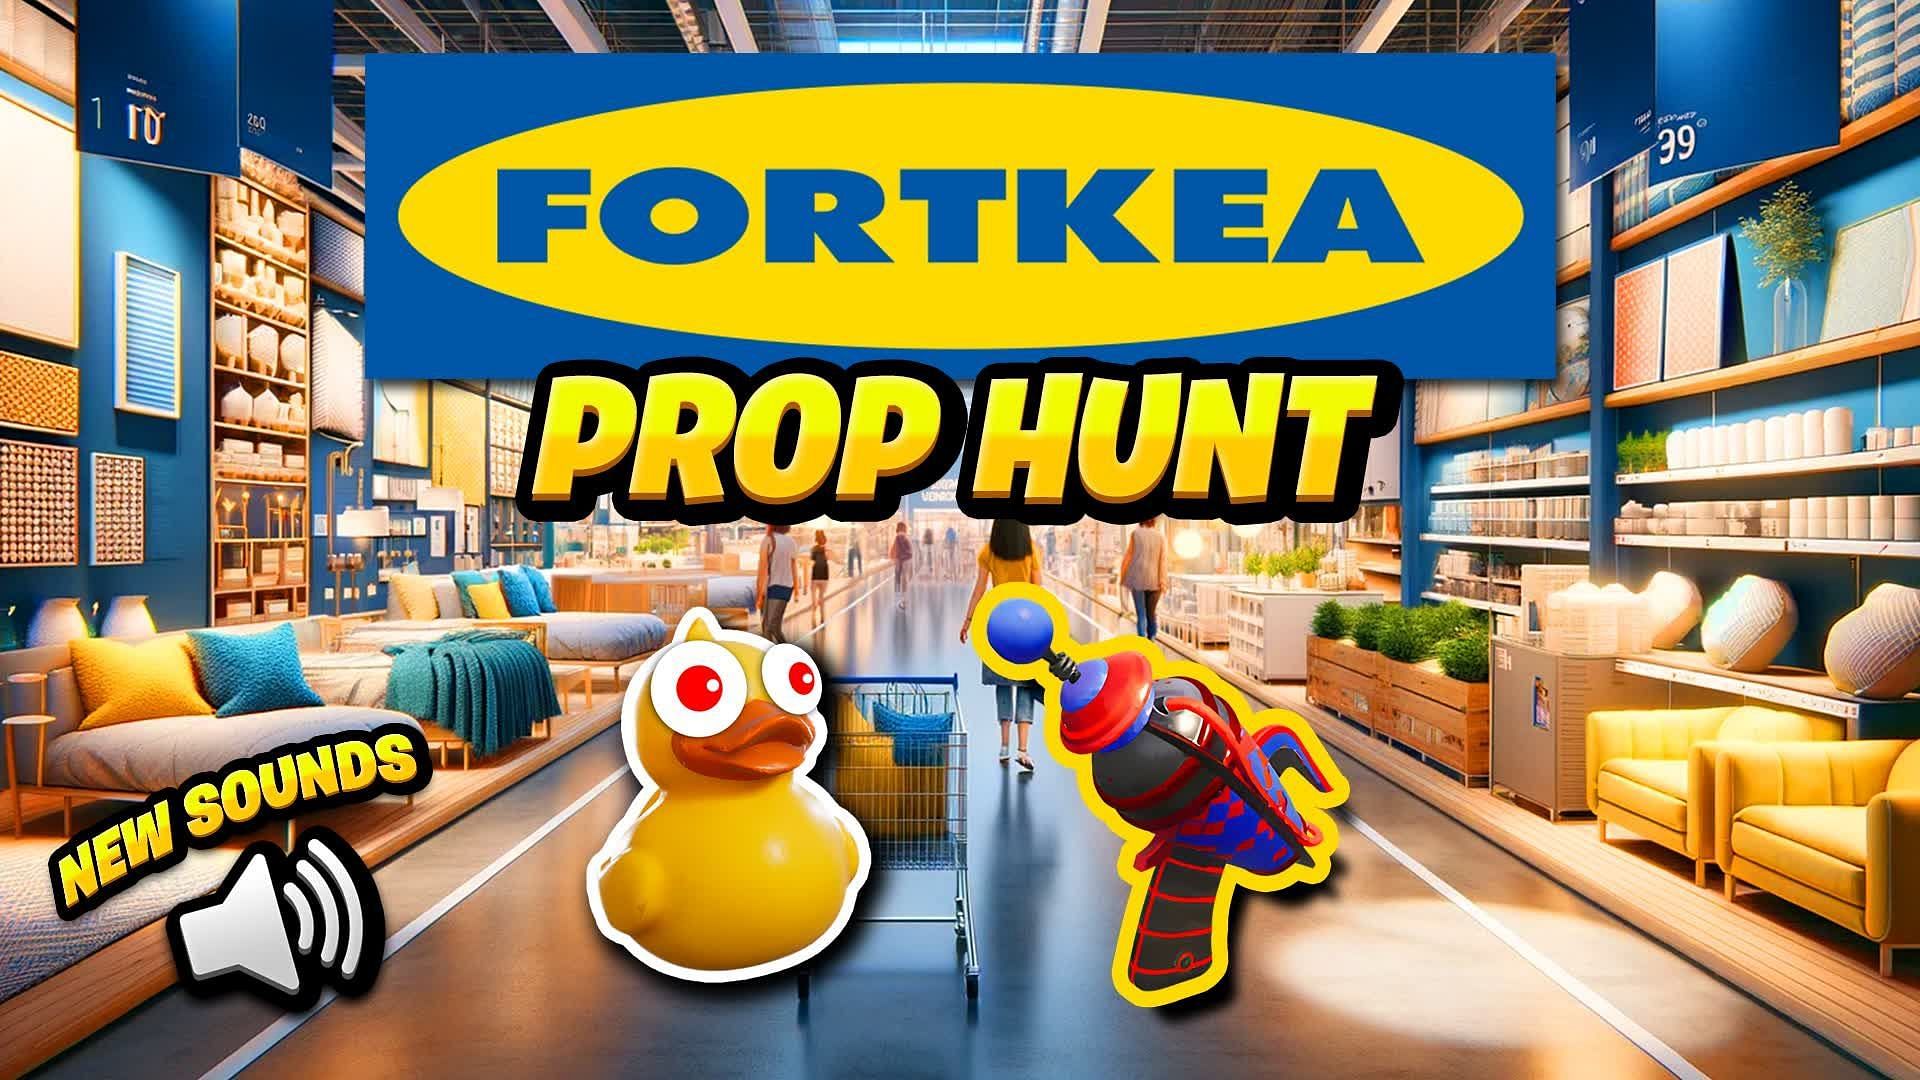 Fortnite Fortkea Prop Hunt: UEFN map code, how to play, and more